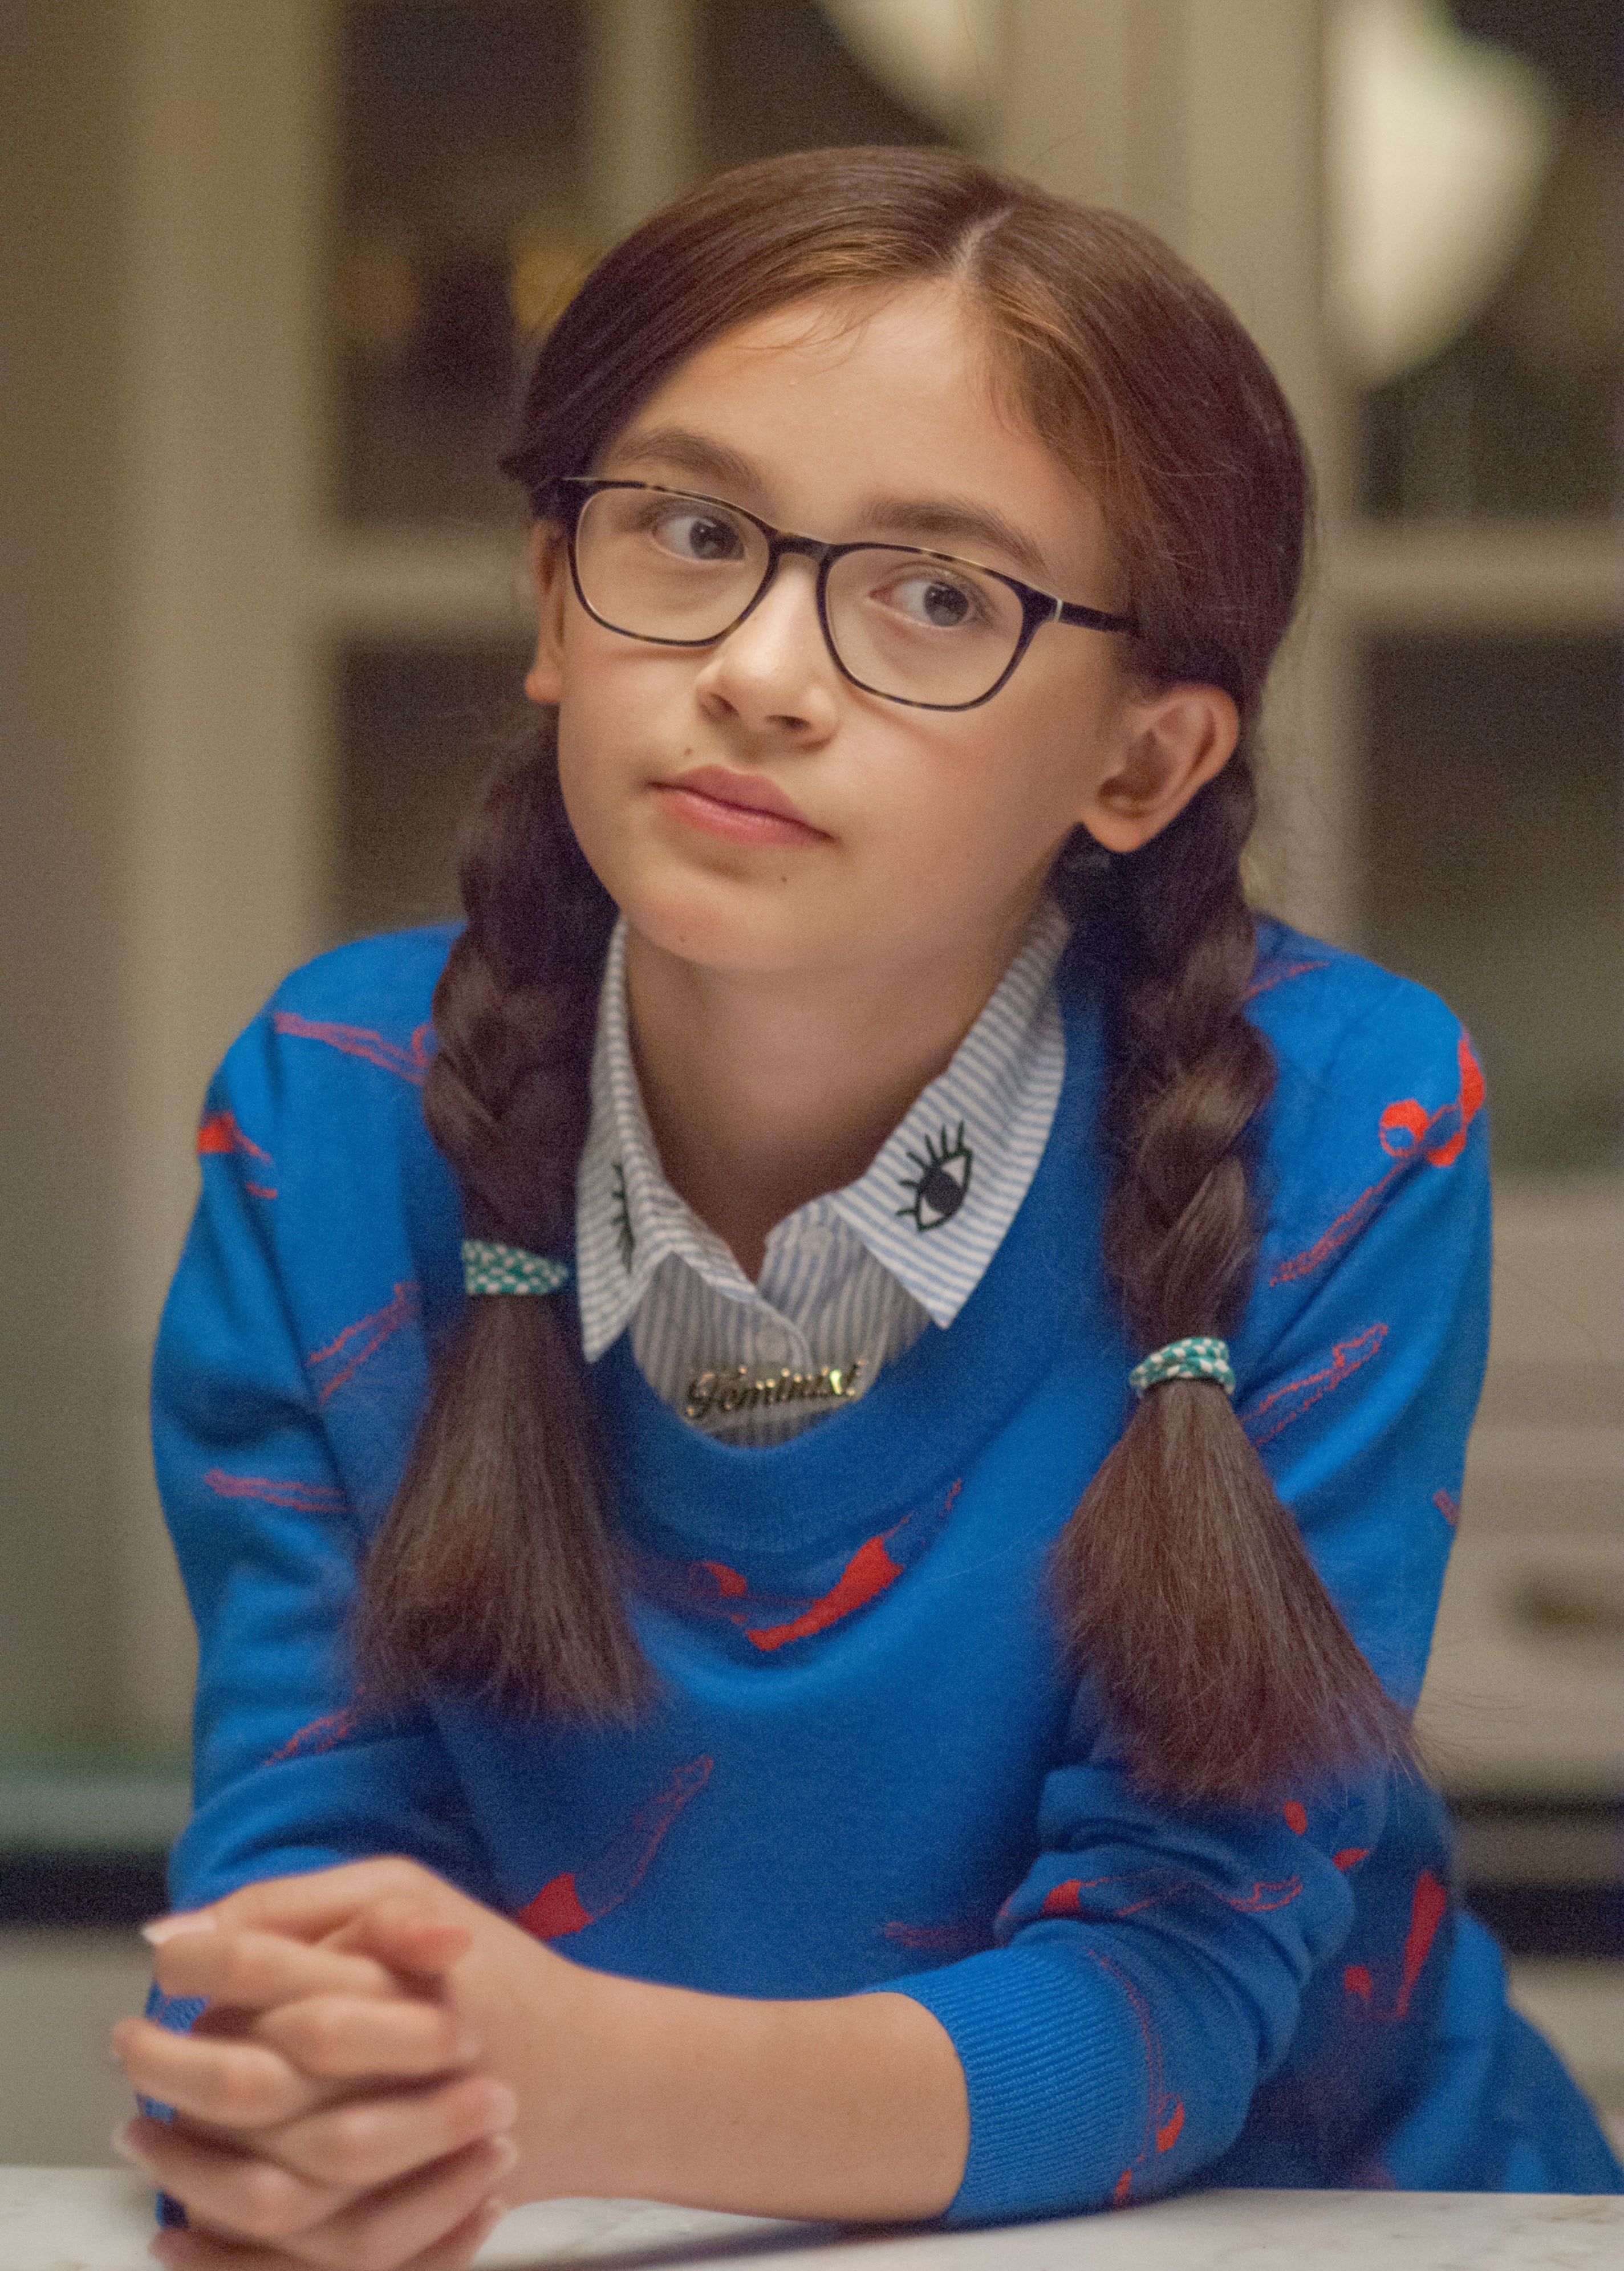 Anna Cathcart with braided hair wearing glasses and a patterned sweater